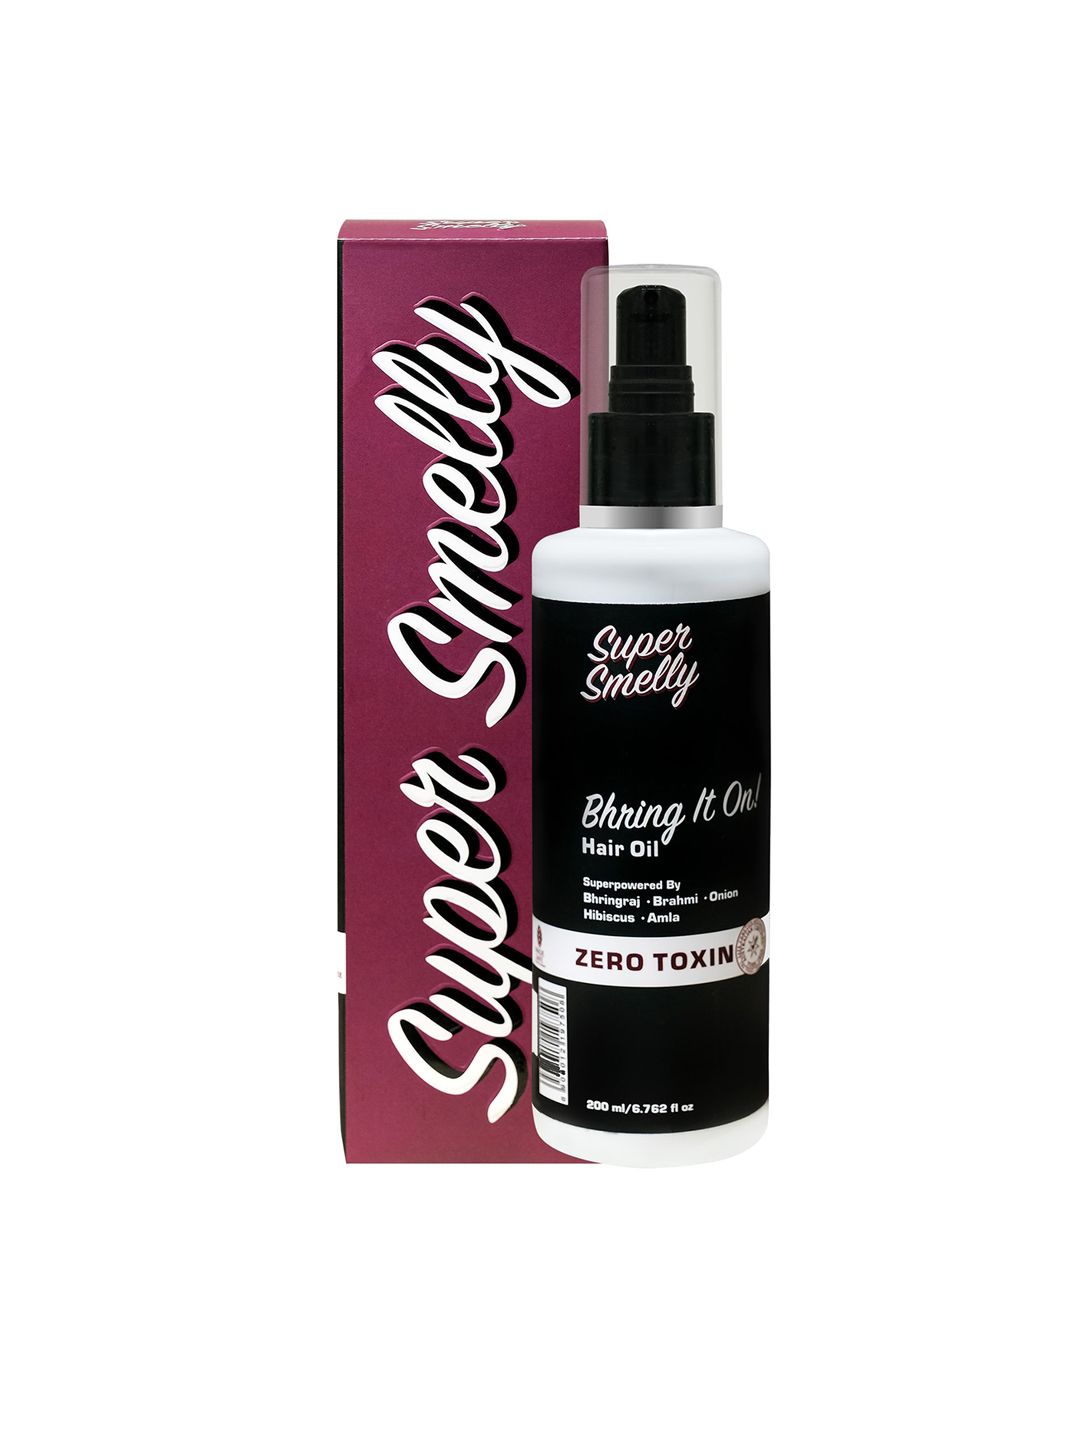 Super Smelly Unisex Bhring it on hair oil 200 ml Price in India